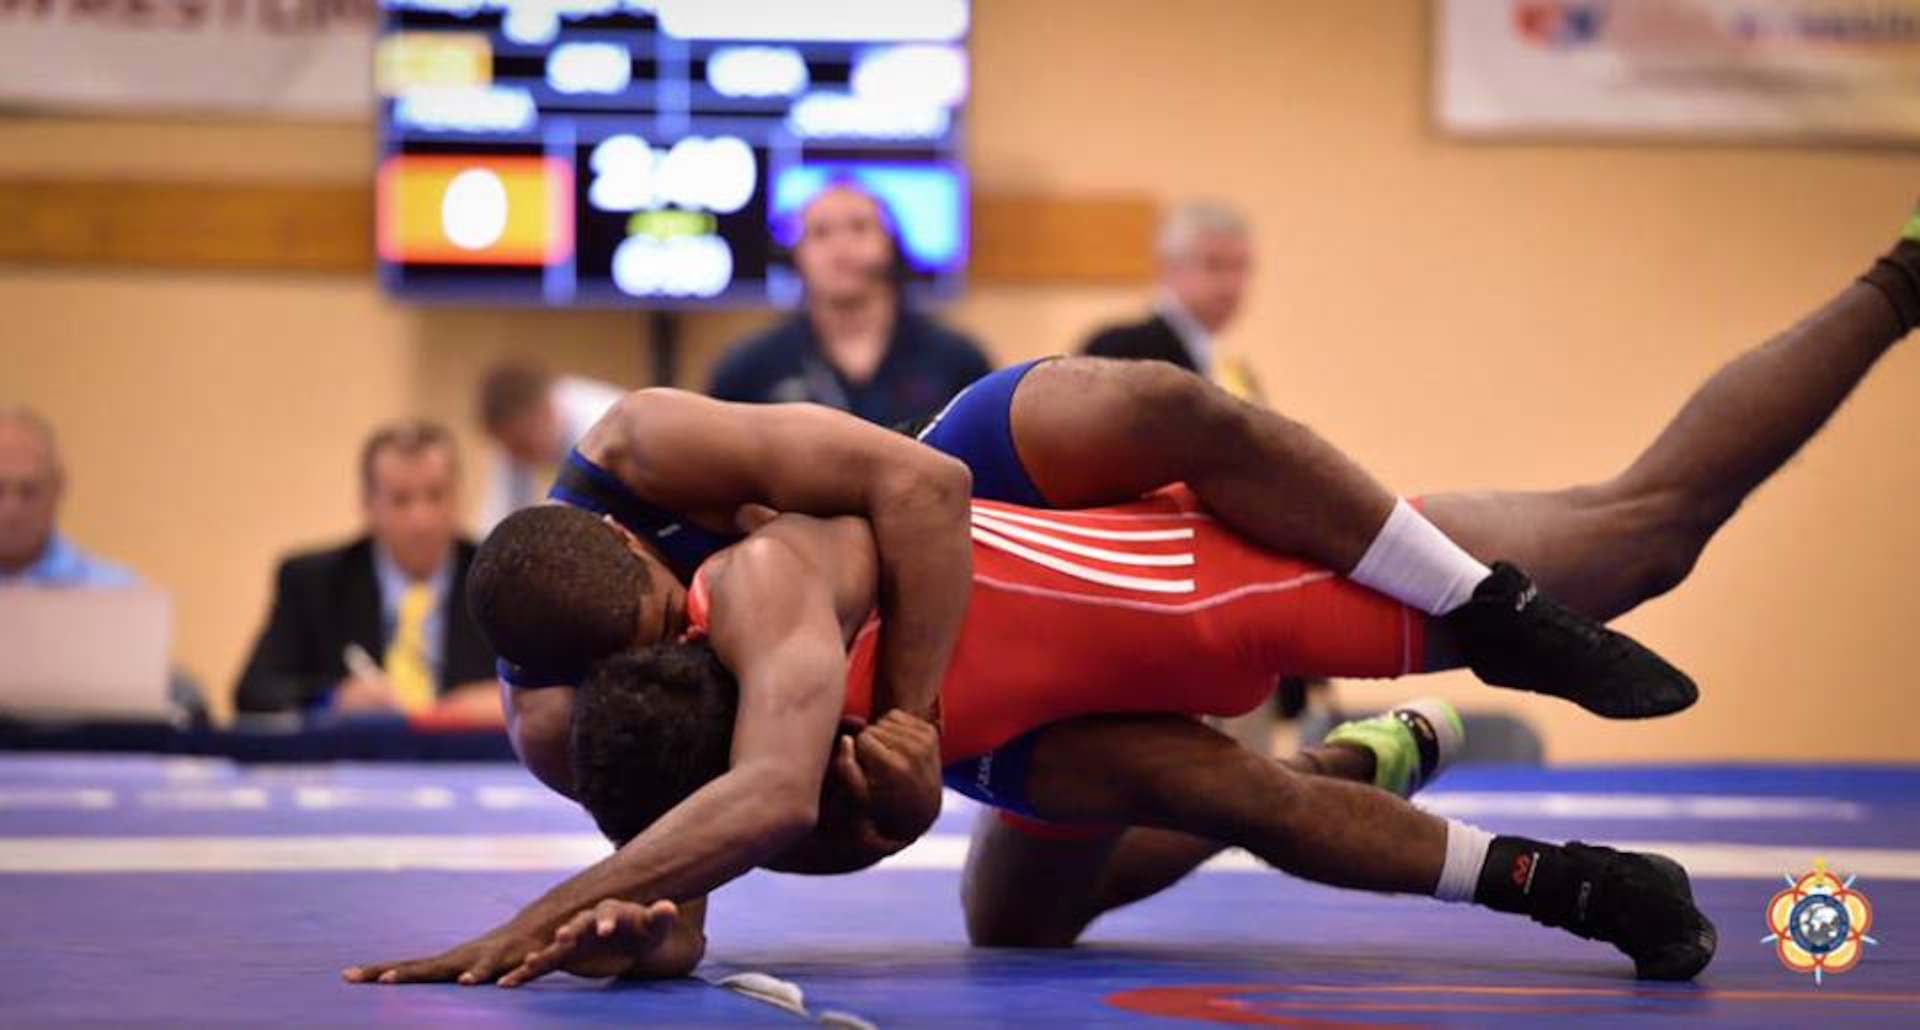 Army PFC Jamel Johnson (blue) turns his opponent during his victory over Chamara Perera (Sri Lanka), 16-5 in the Men's Freestyle 65kg division. Johnson place 5th in his division during the 2014 CISM World Military Wrestling Championship at Joint Base McGuire-Dix-Lakehurst, New Jersey on 3 October 2014.